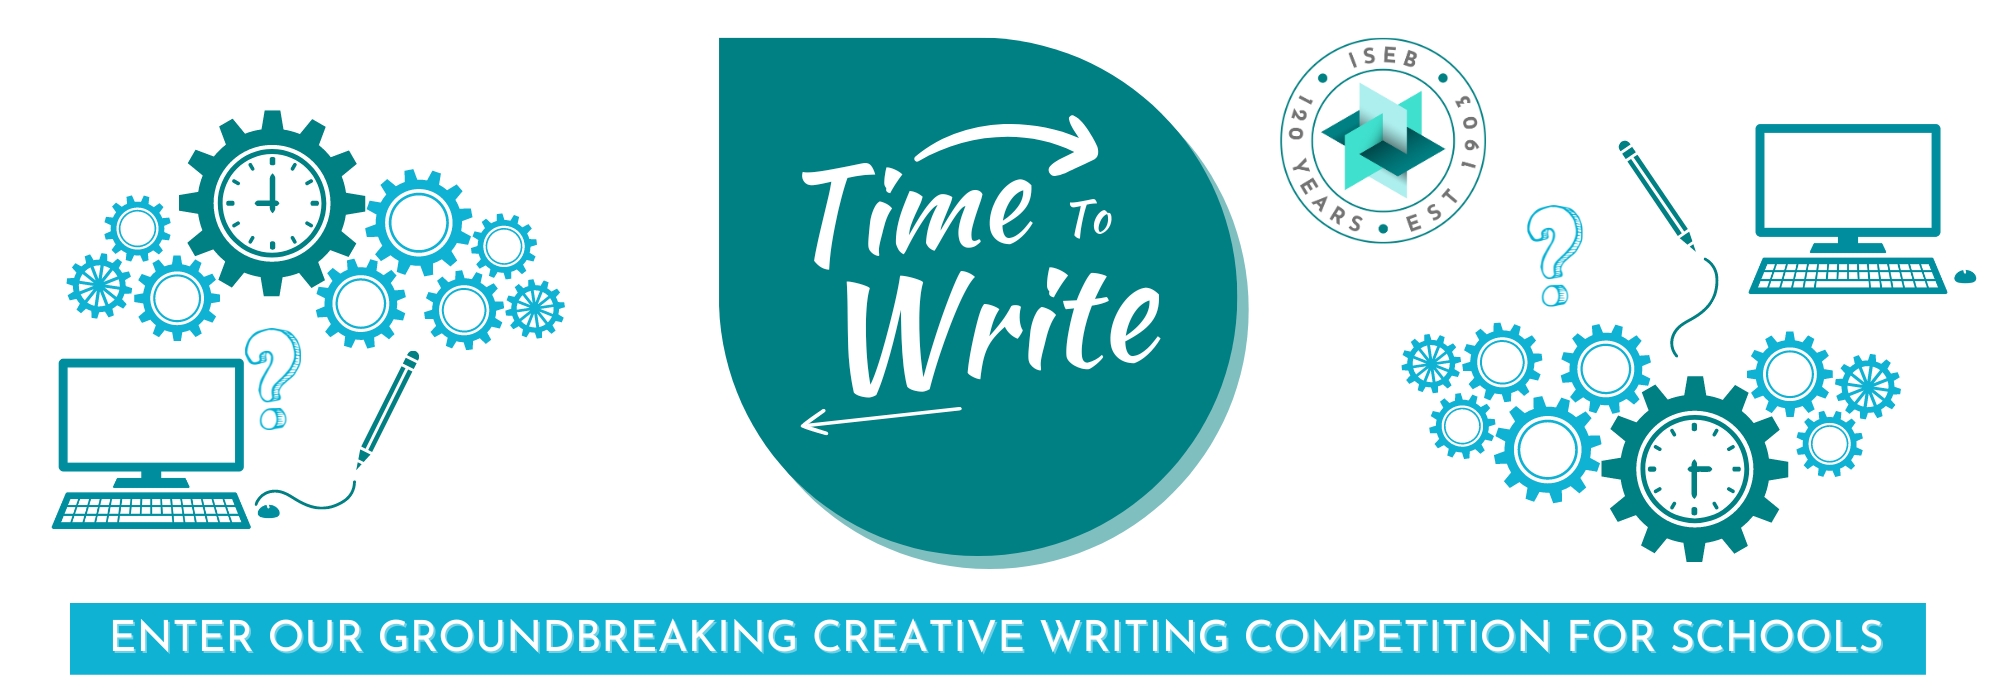 isa creative writing competition